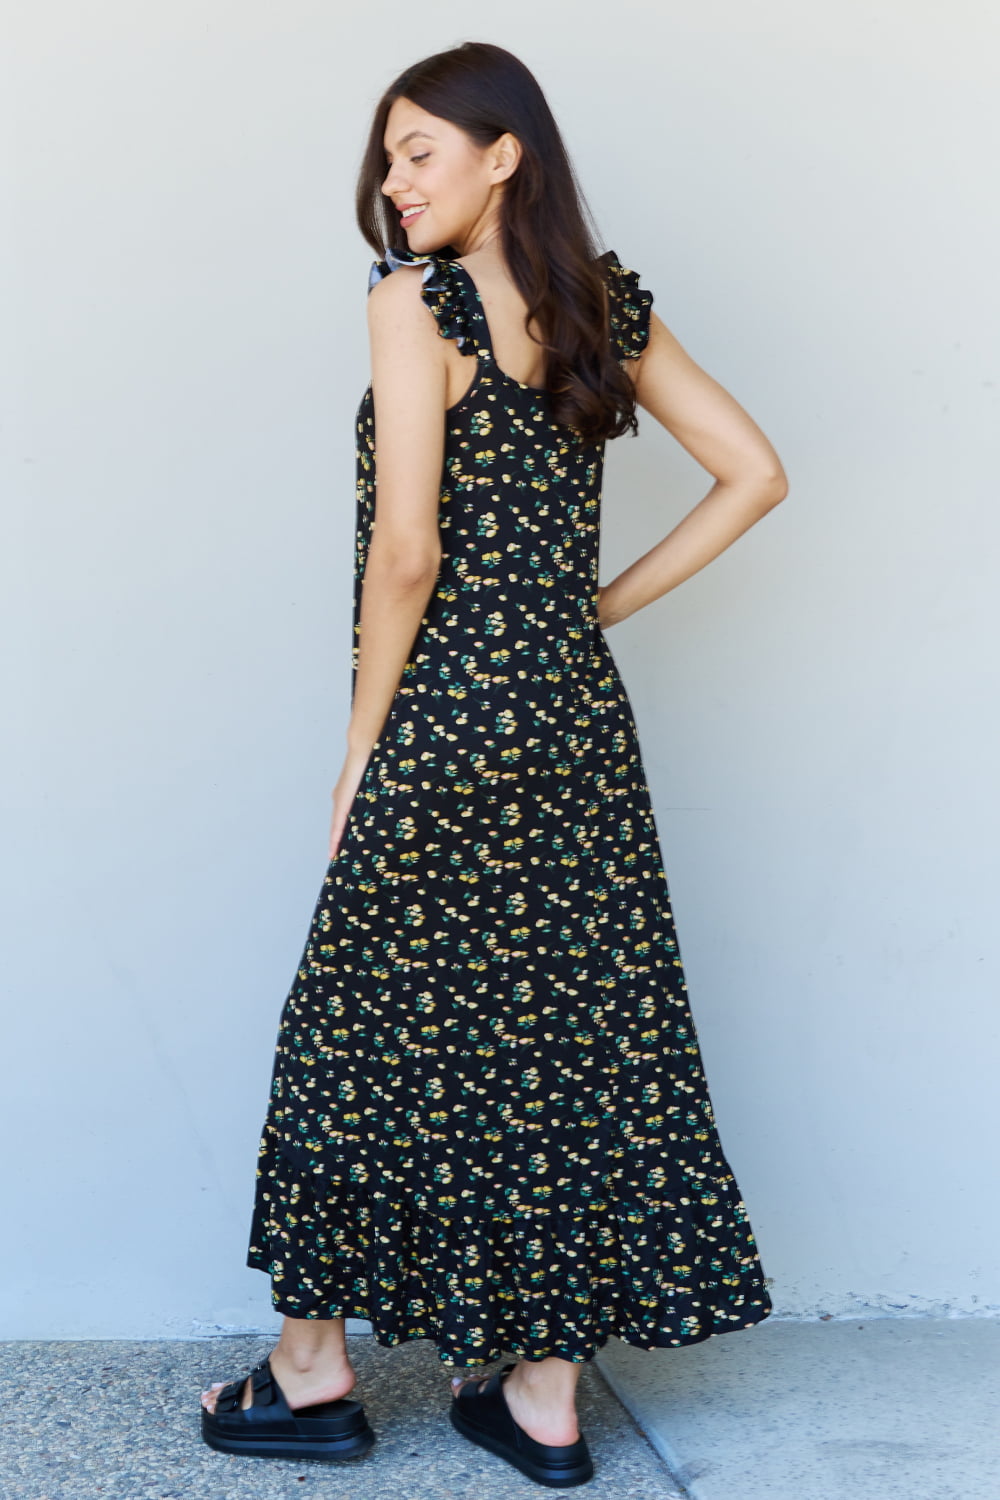 Light Gray Doublju In The Garden Ruffle Floral Maxi Dress in  Black Yellow Floral Sentient Beauty Fashions Apparel & Accessories